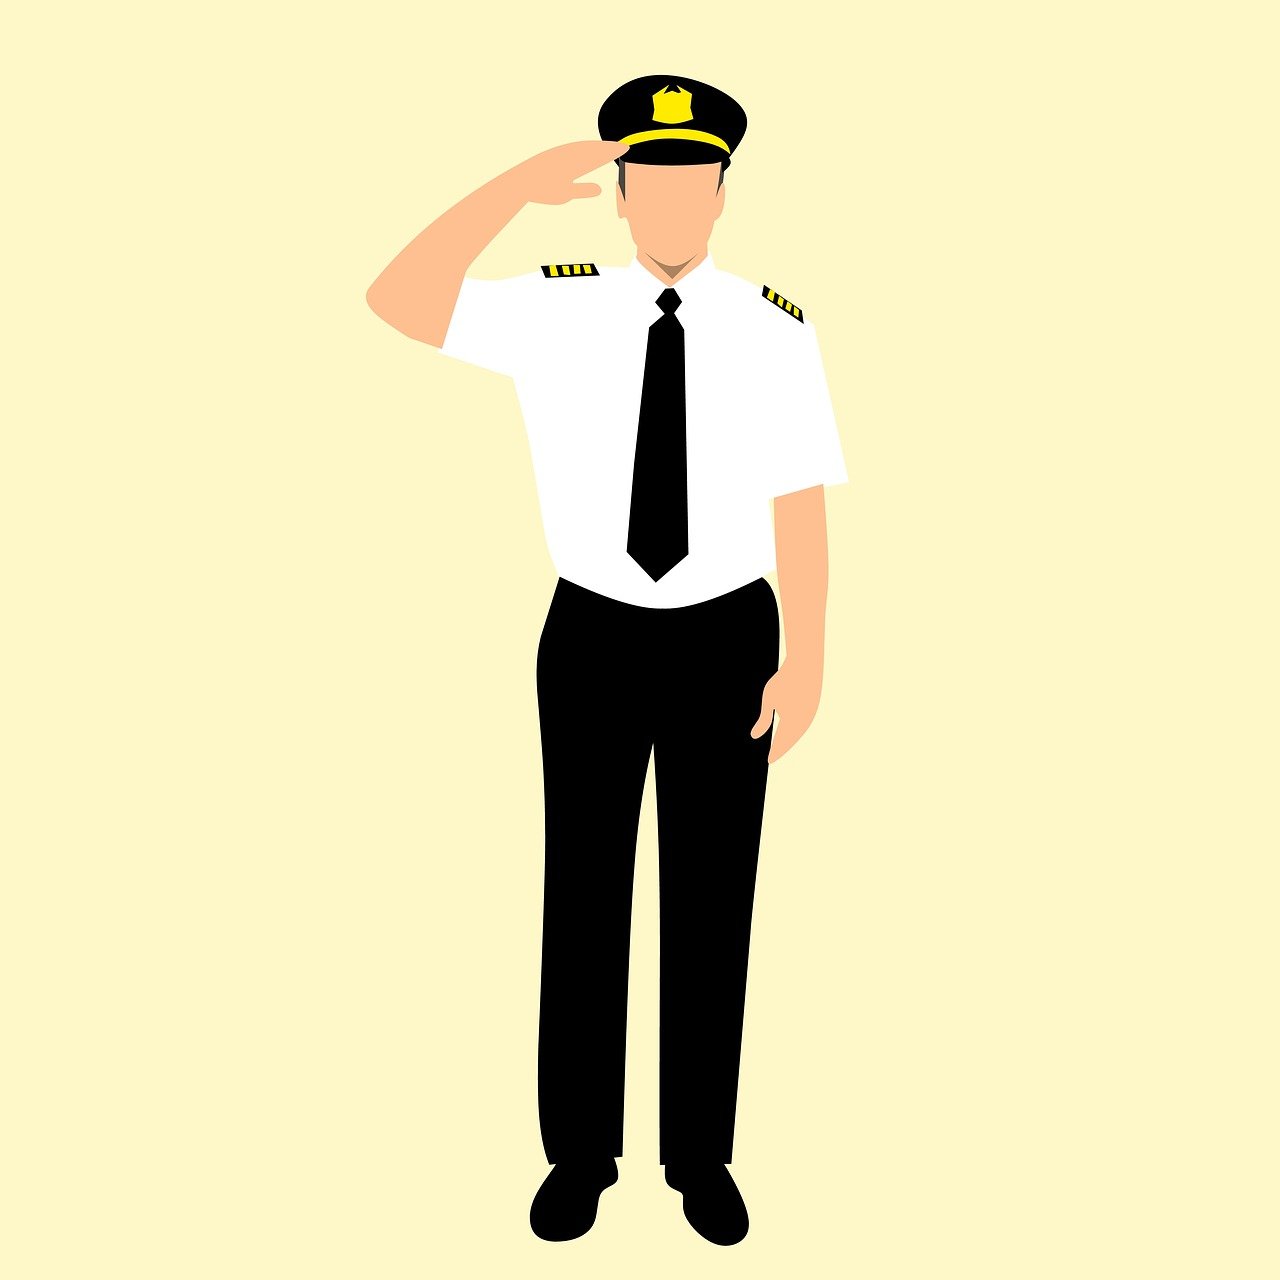 a man in a pilot's uniform saluting, a cartoon, shutterstock, simple and clean illustration, wearing a shirt with a tie, full body illustration, full body close-up shot